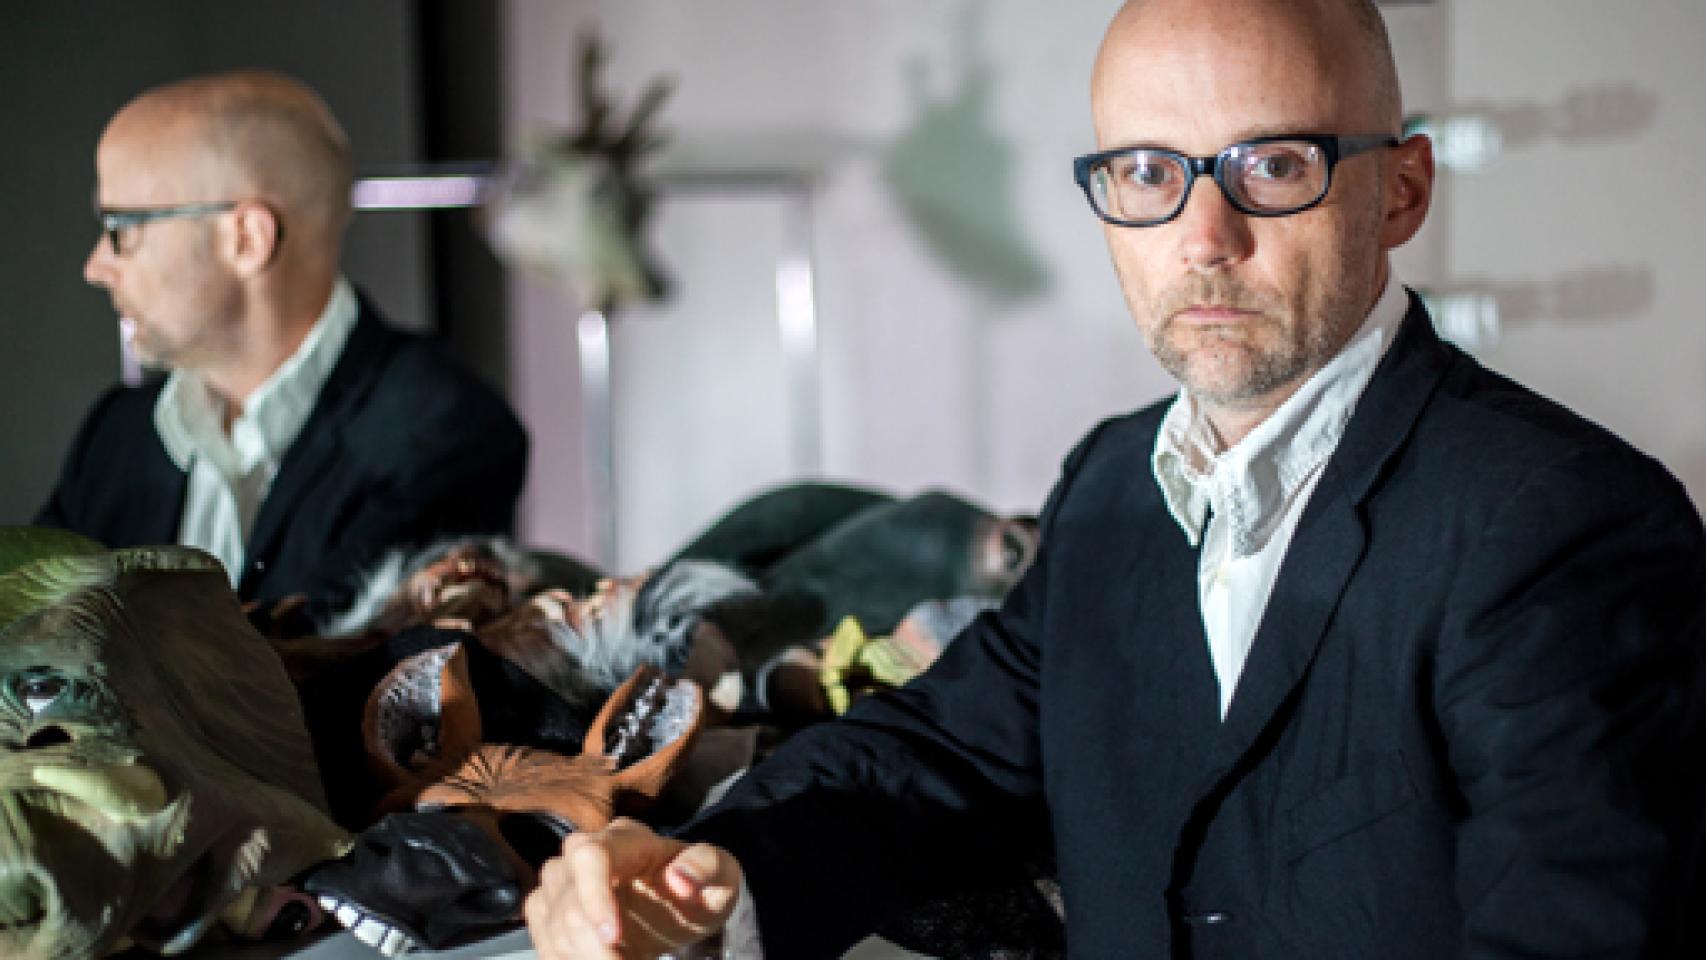 Image: Moby: En Nueva York las finanzas han reemplazado a la creatividad